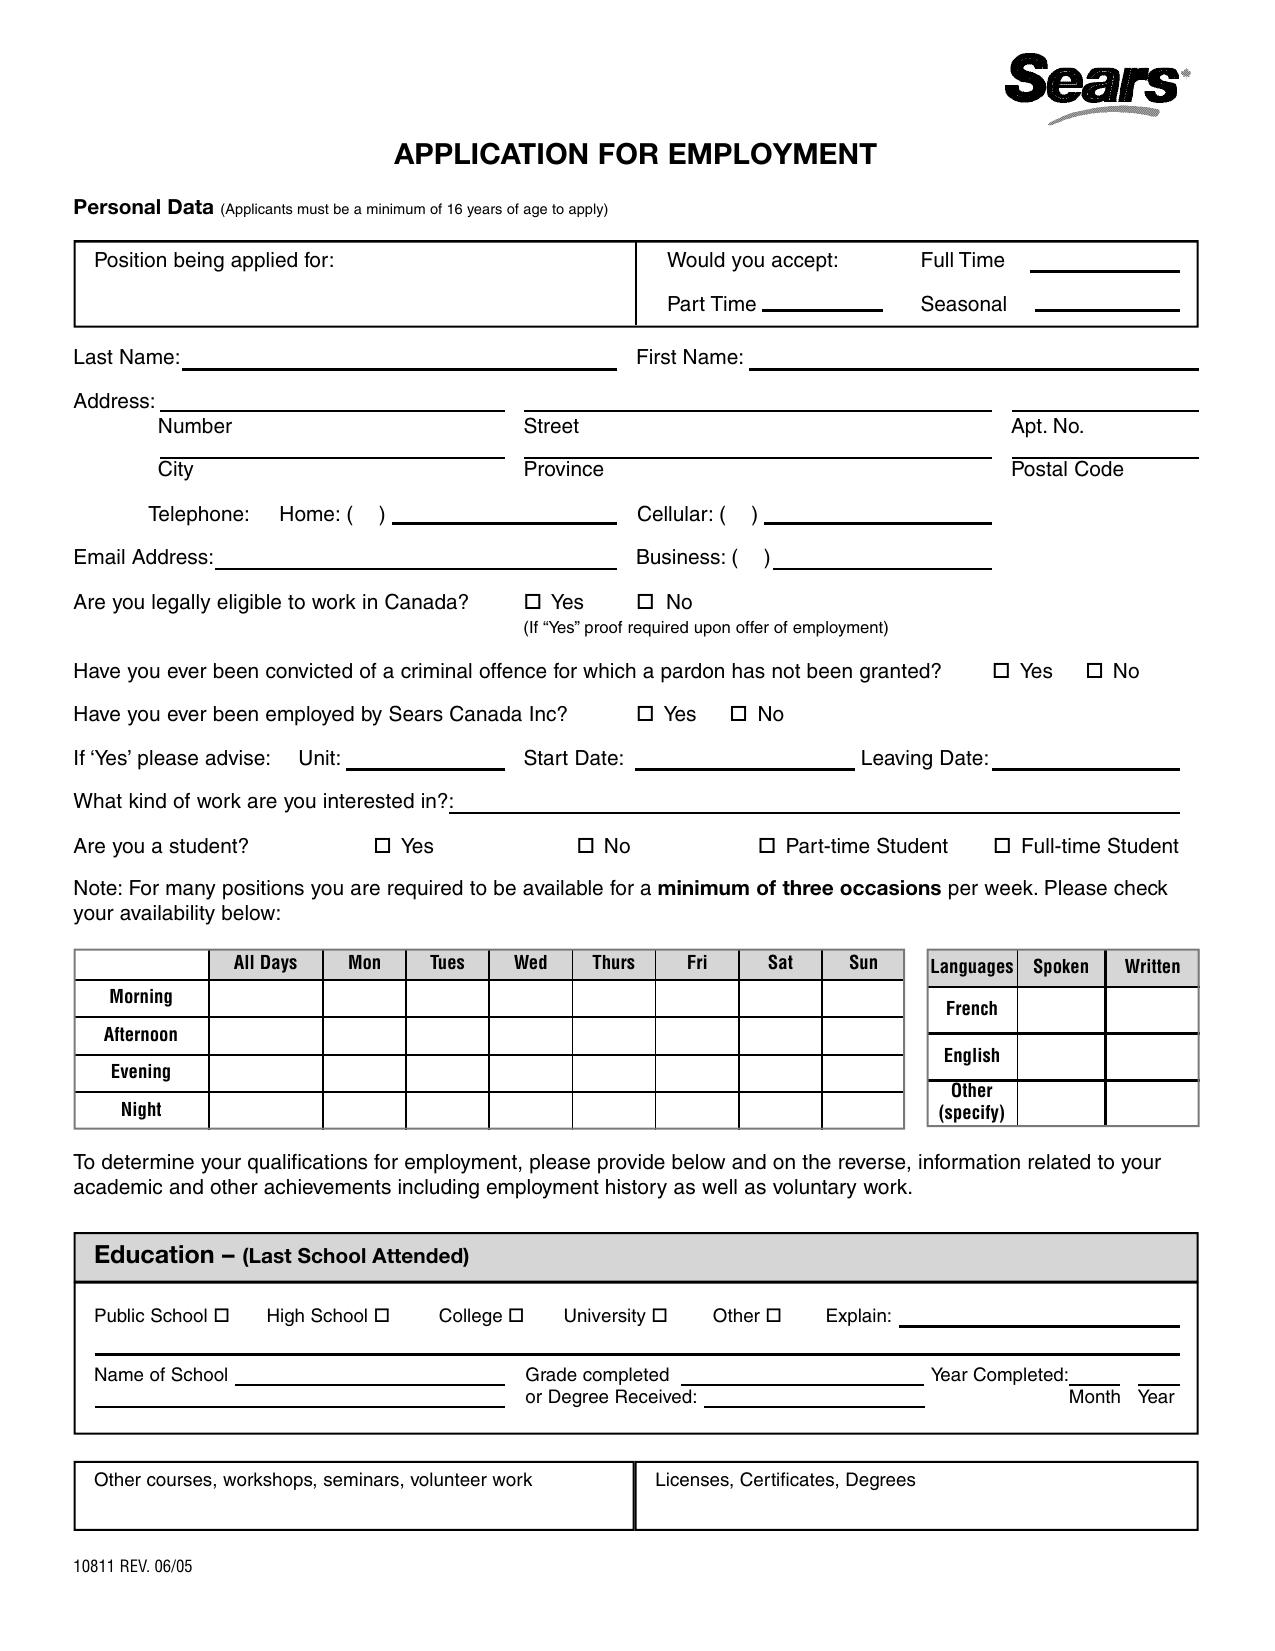 Application Form For Work Katera